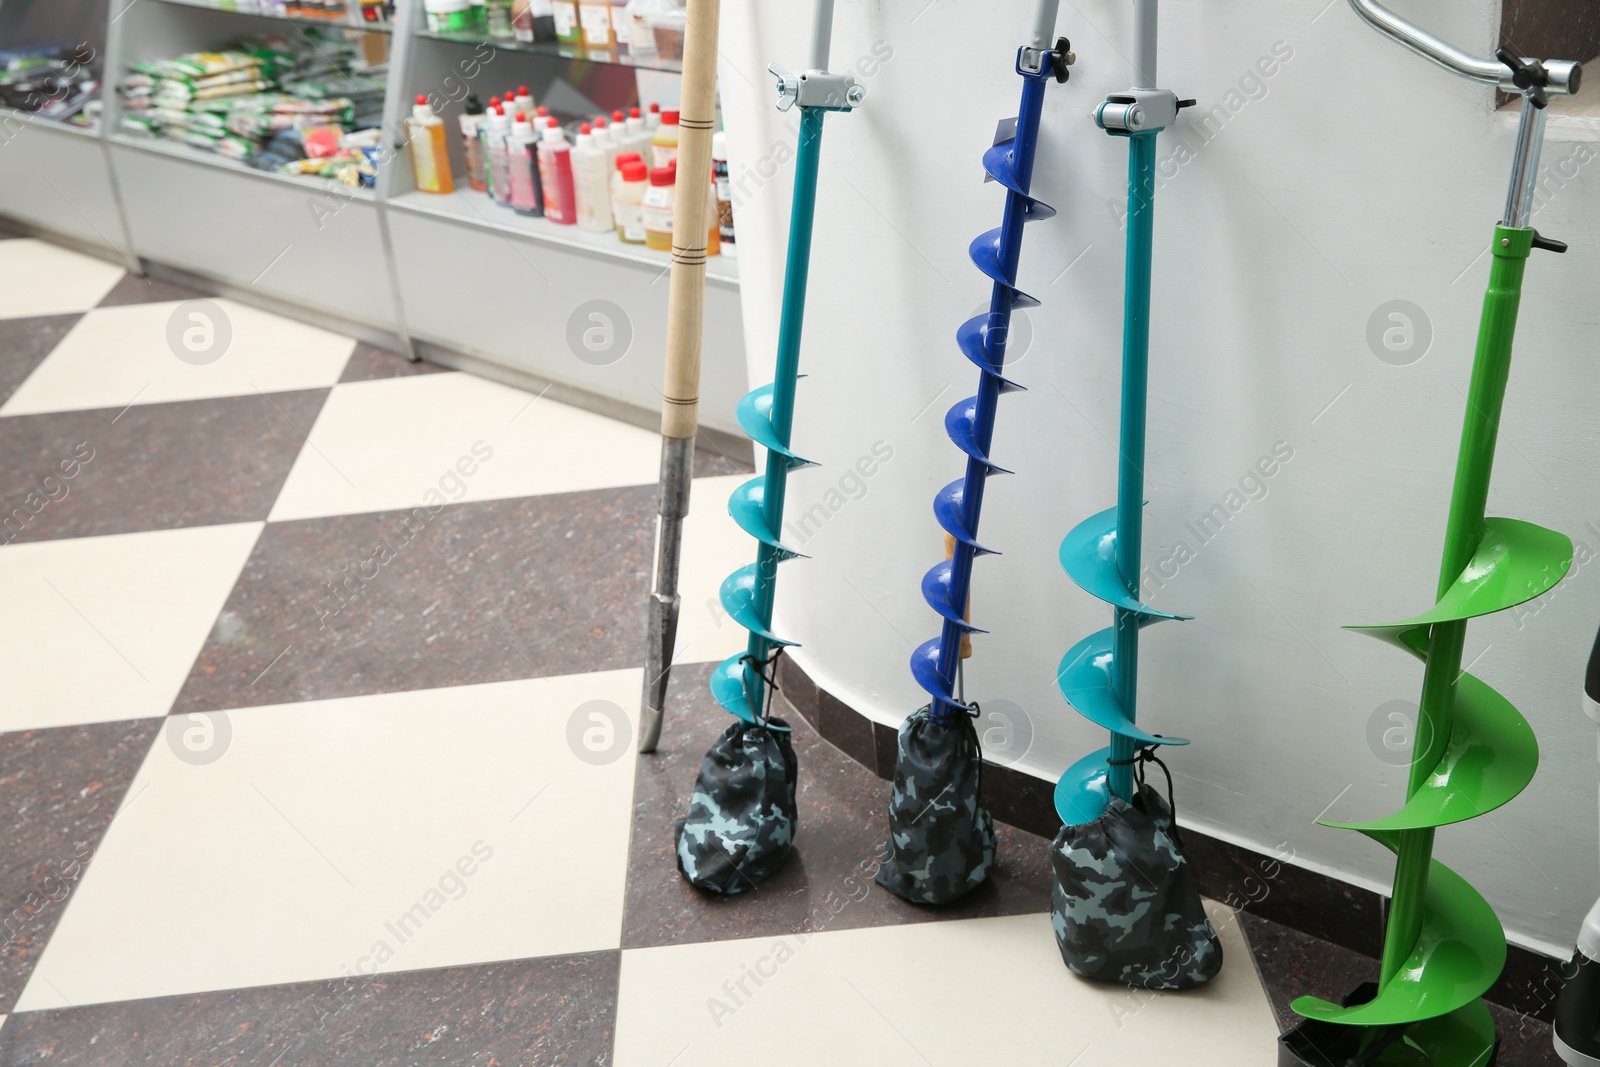 Photo of Fishing equipment on floor in sports shop